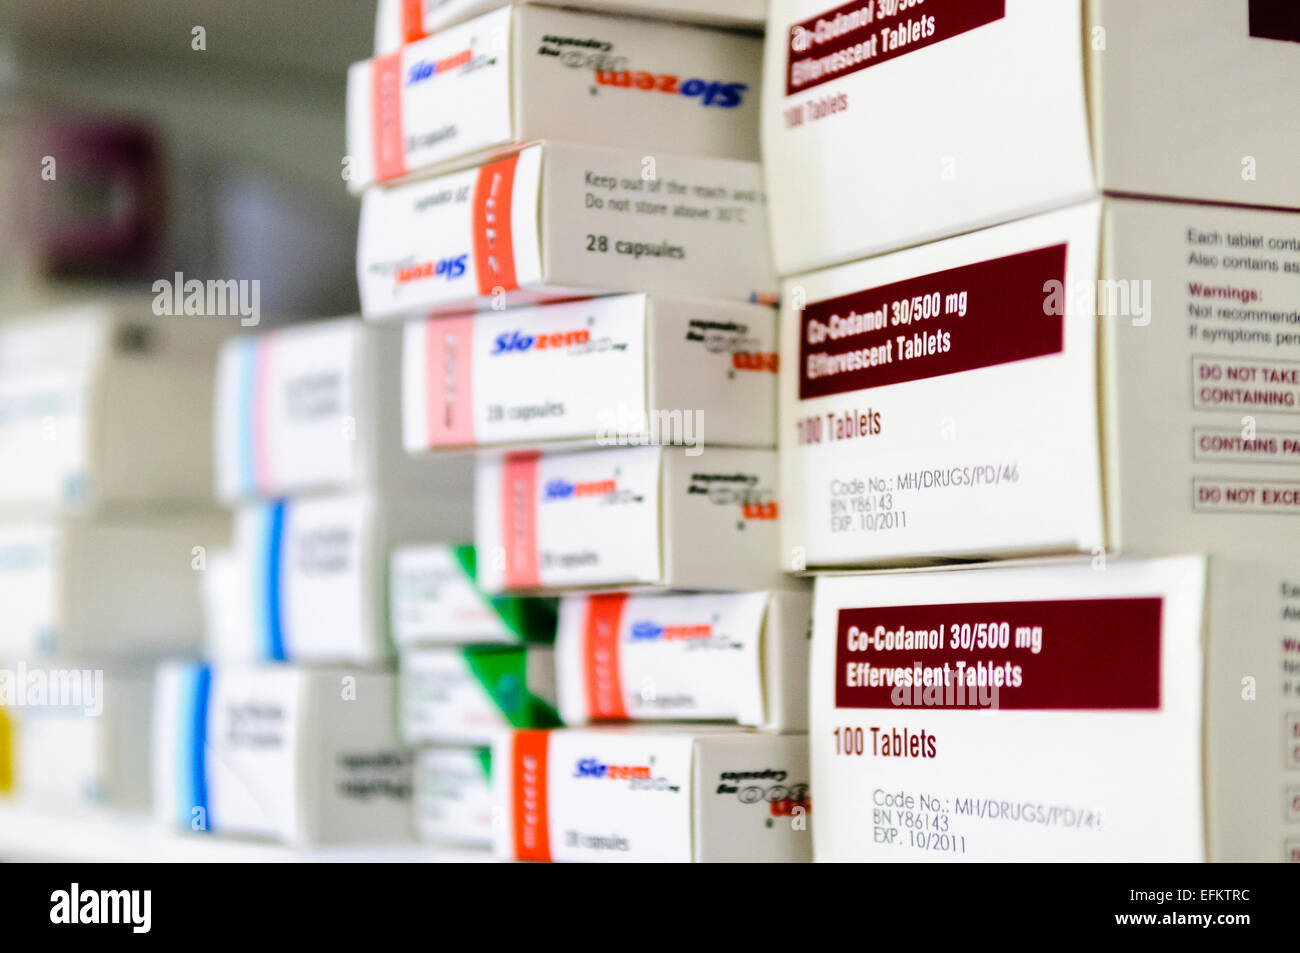 Co-codamol and other tablets stacked on a shelf at a pharmacy Stock Photo